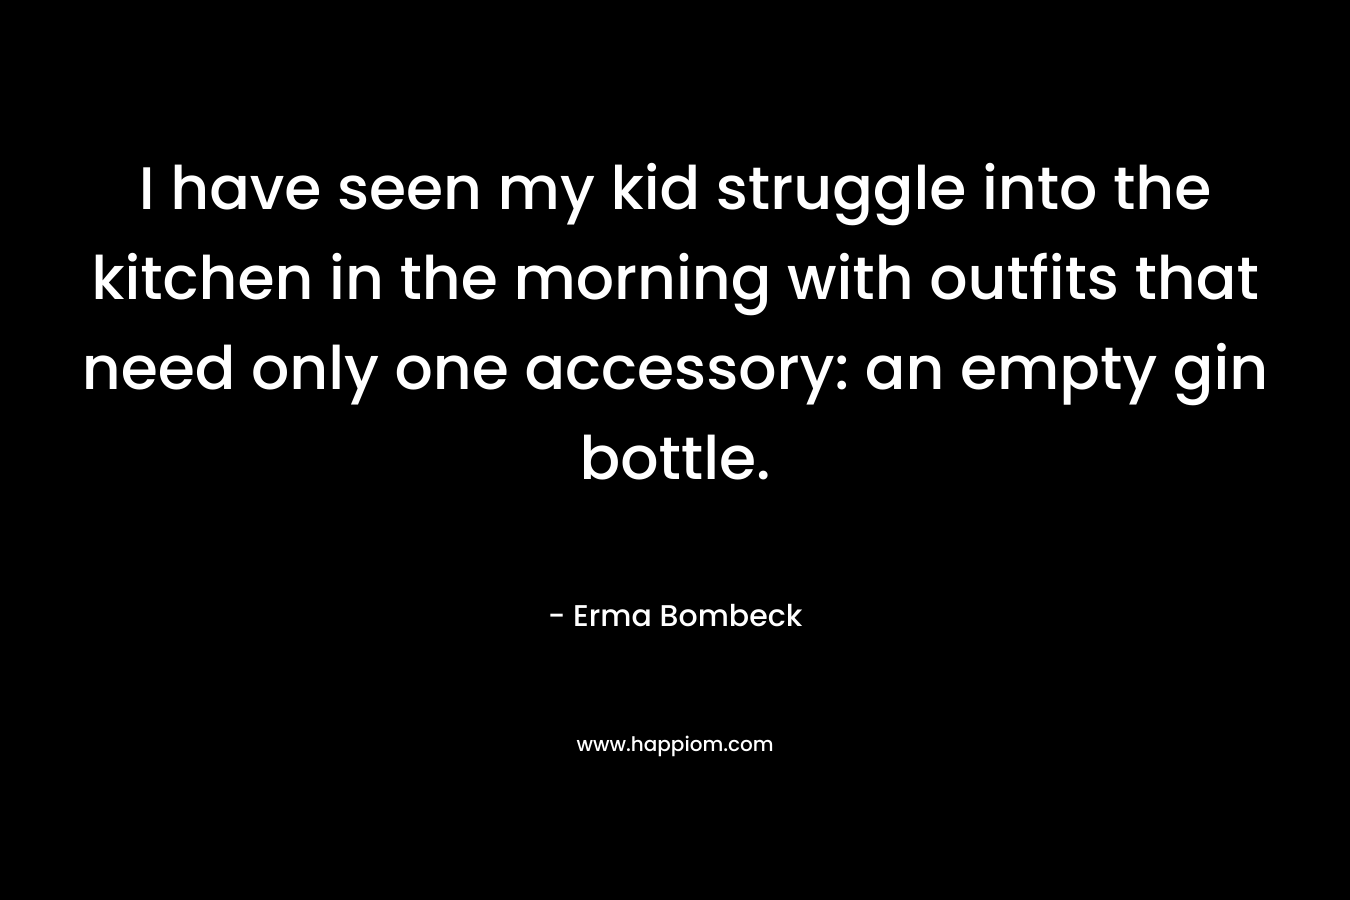 I have seen my kid struggle into the kitchen in the morning with outfits that need only one accessory: an empty gin bottle. – Erma Bombeck